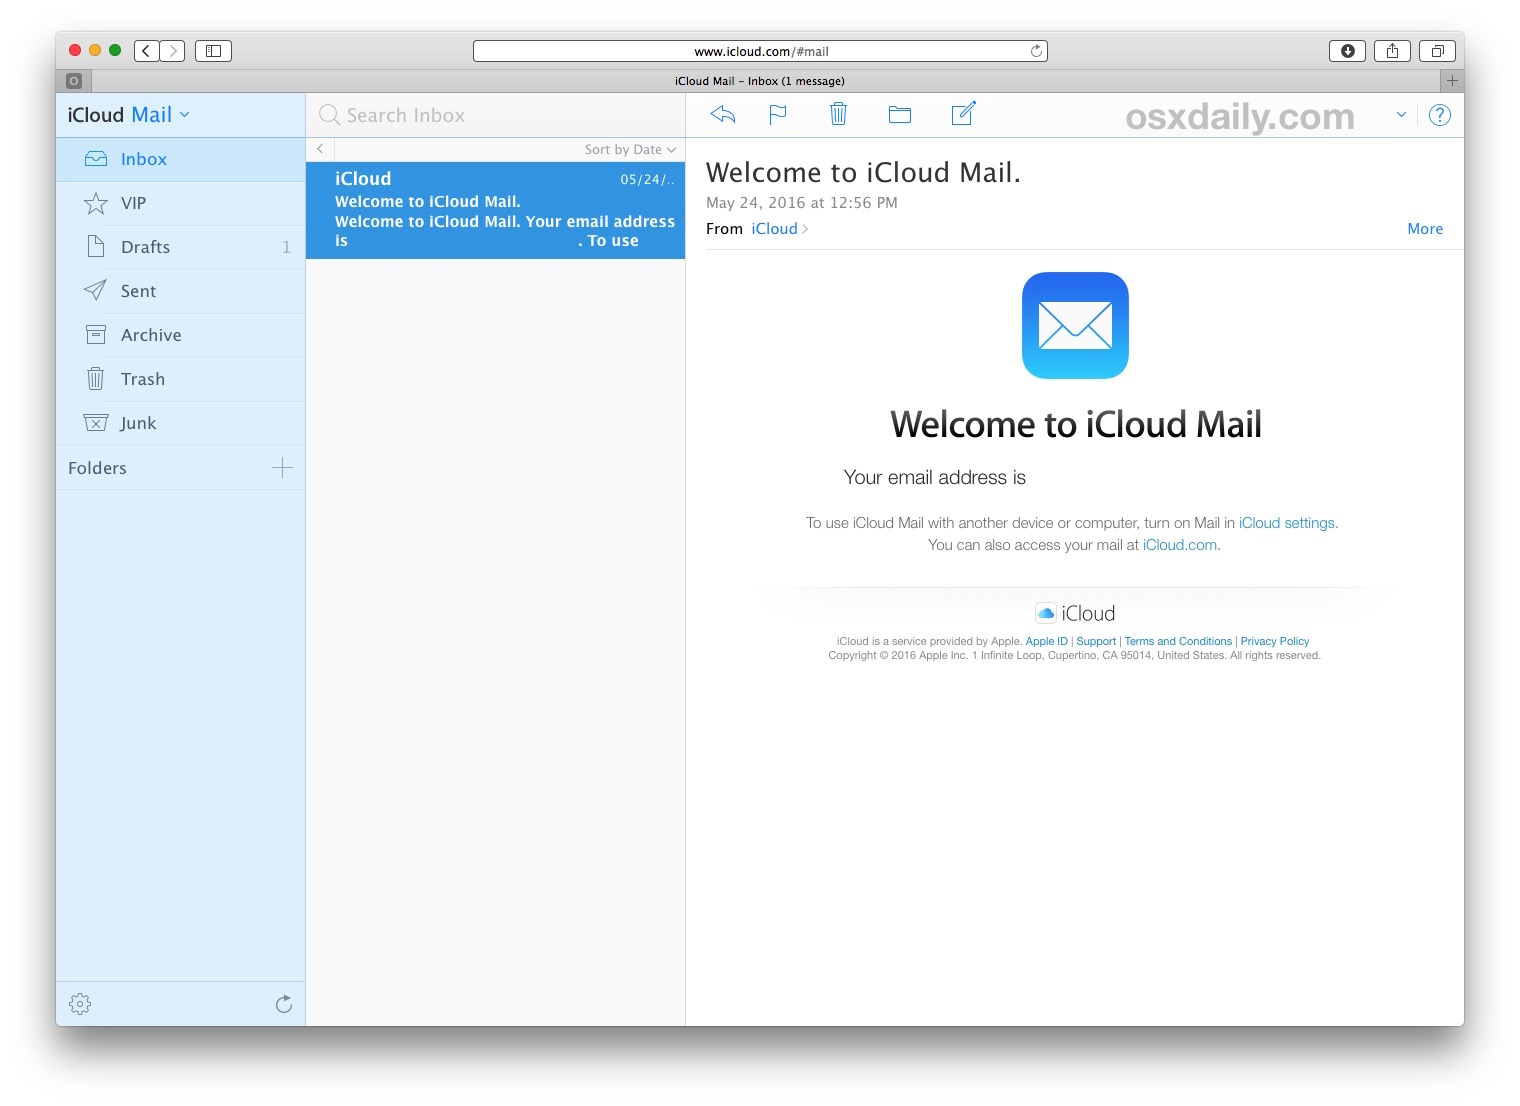 icloud email setup for outlook